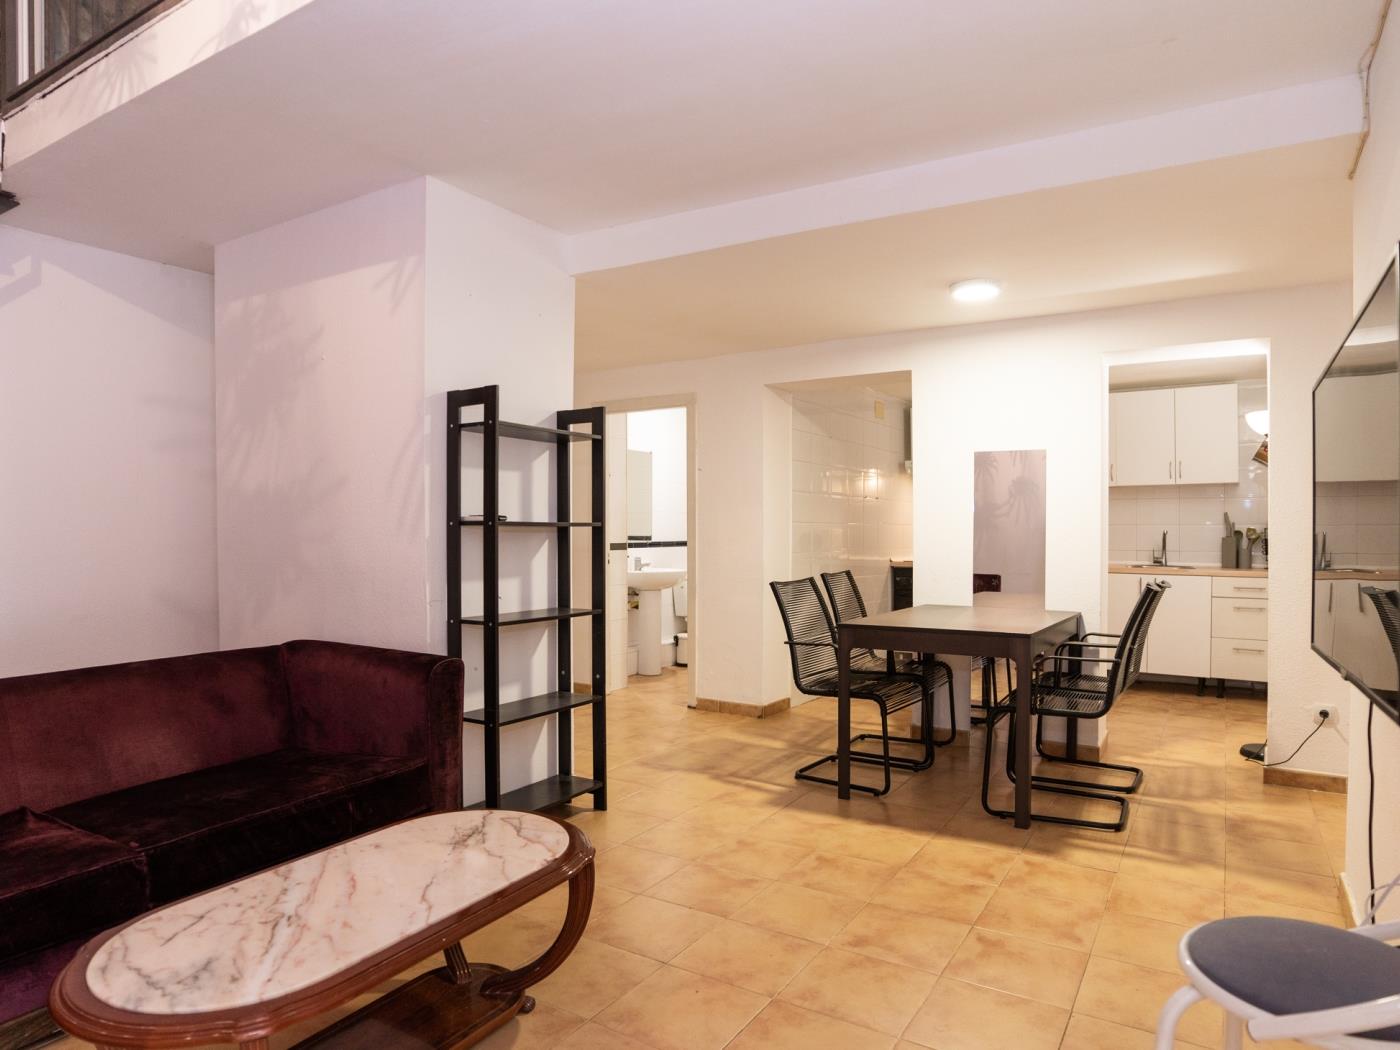 Apartment for professionals or companies in the Gothic Quarter of Barcelona - My Space Barcelona Apartments